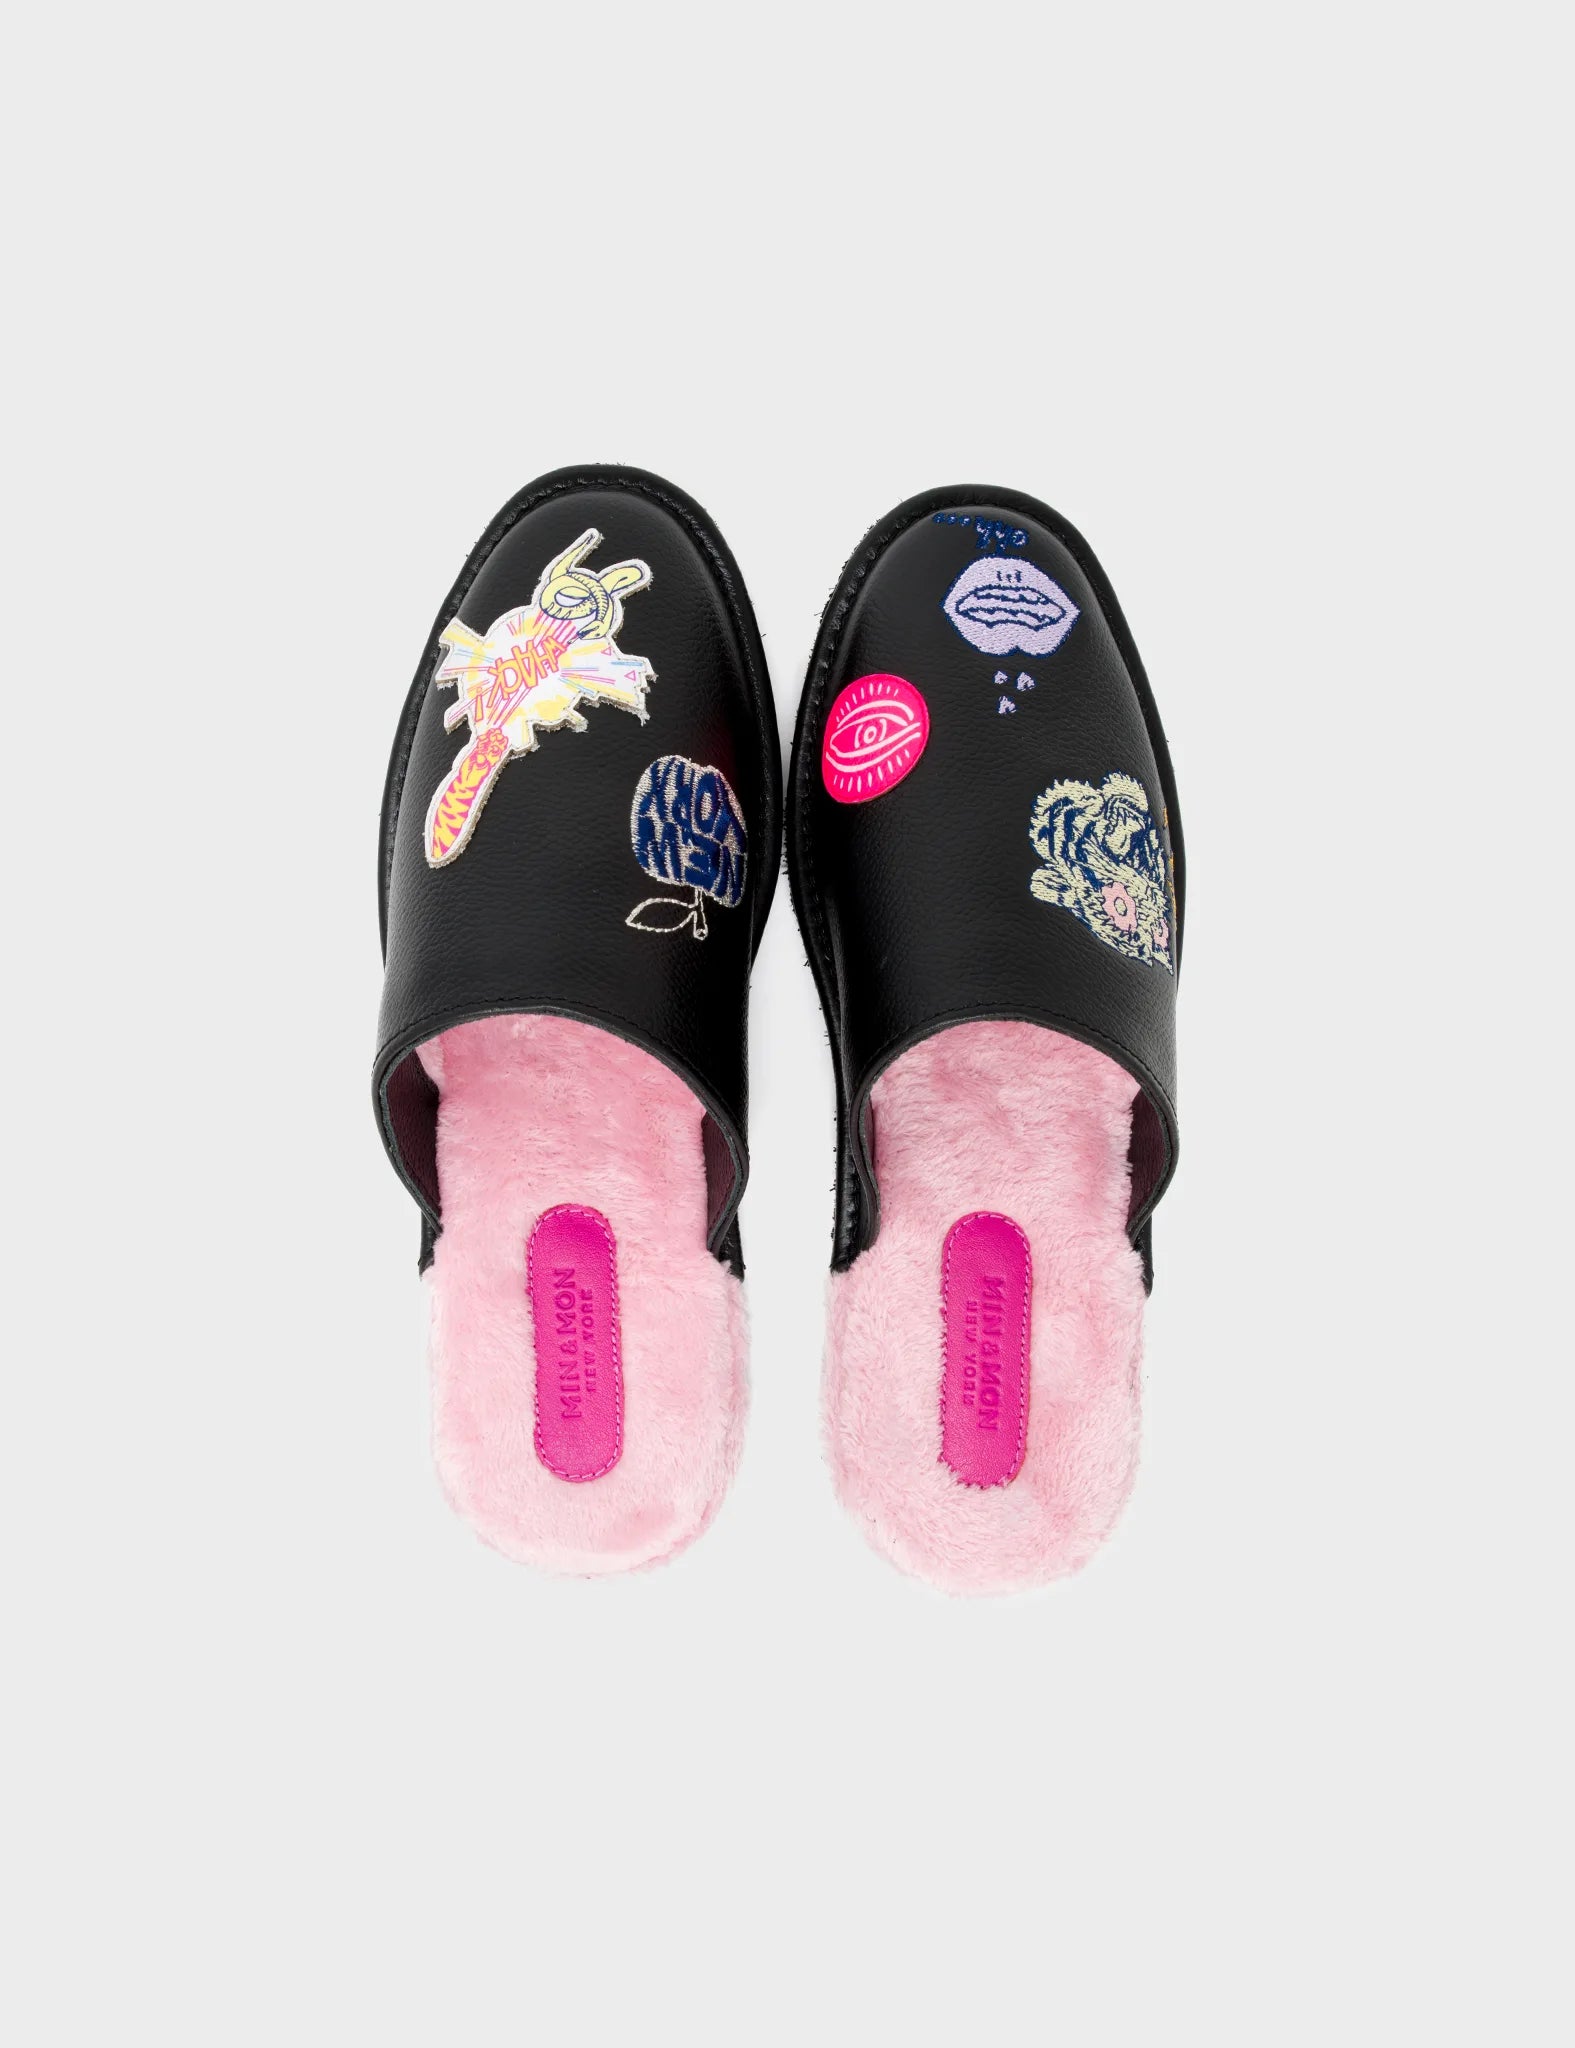  Black Leather Slippers - Tiger Power Embroidery - Top